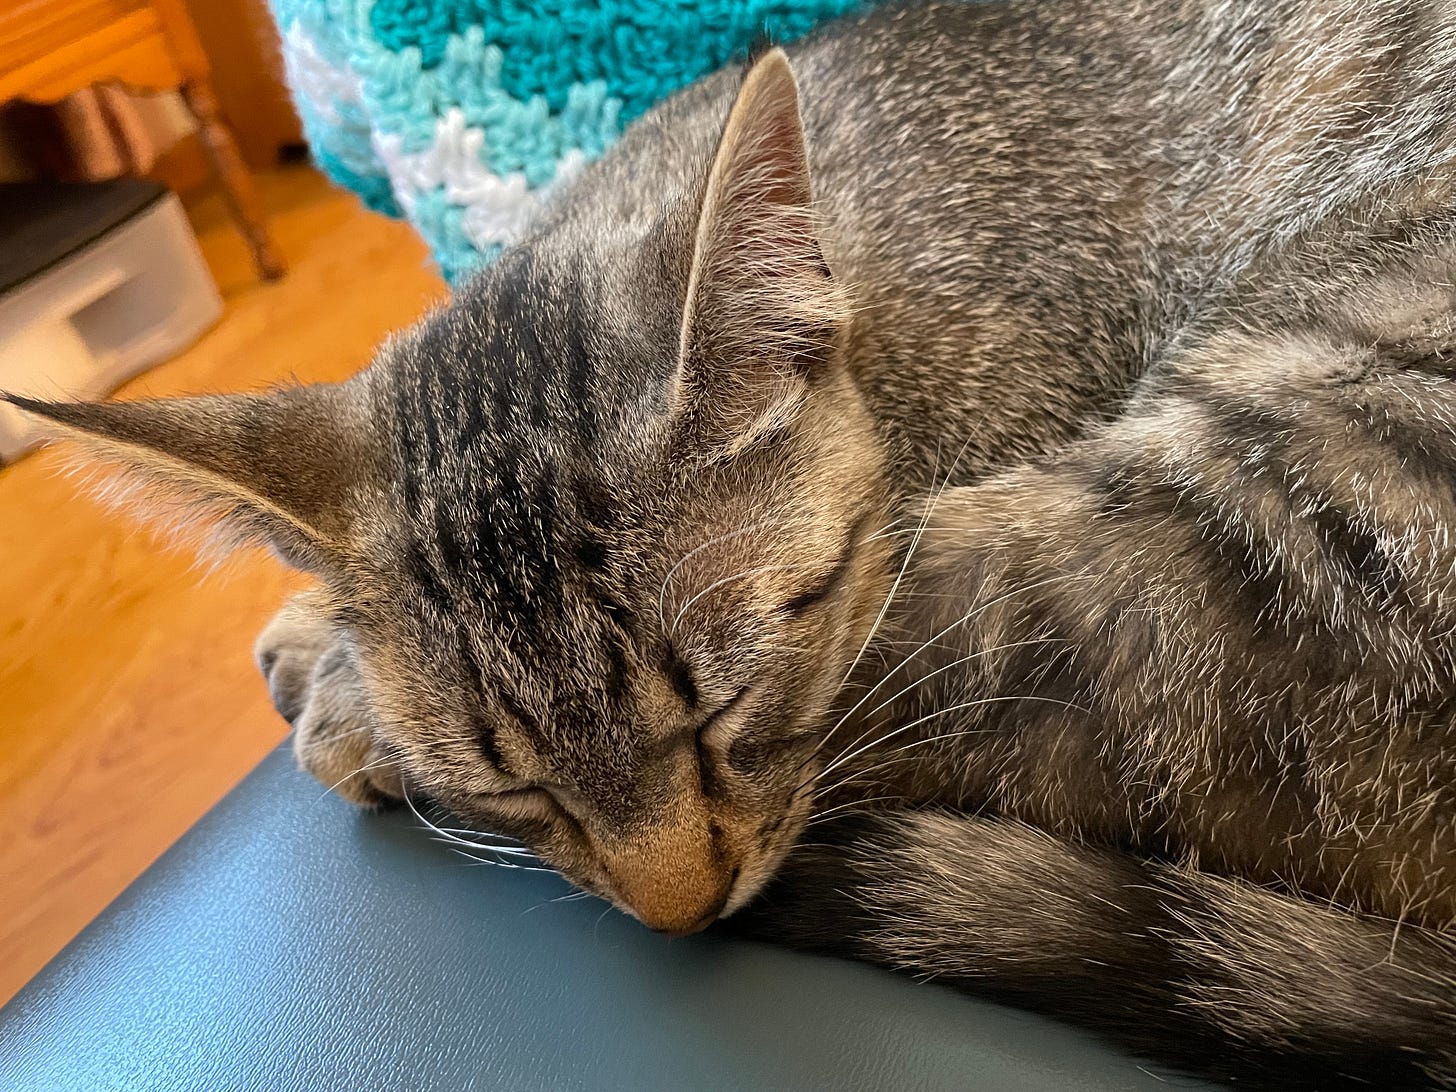 Brown striped cat curled up asleep on chair